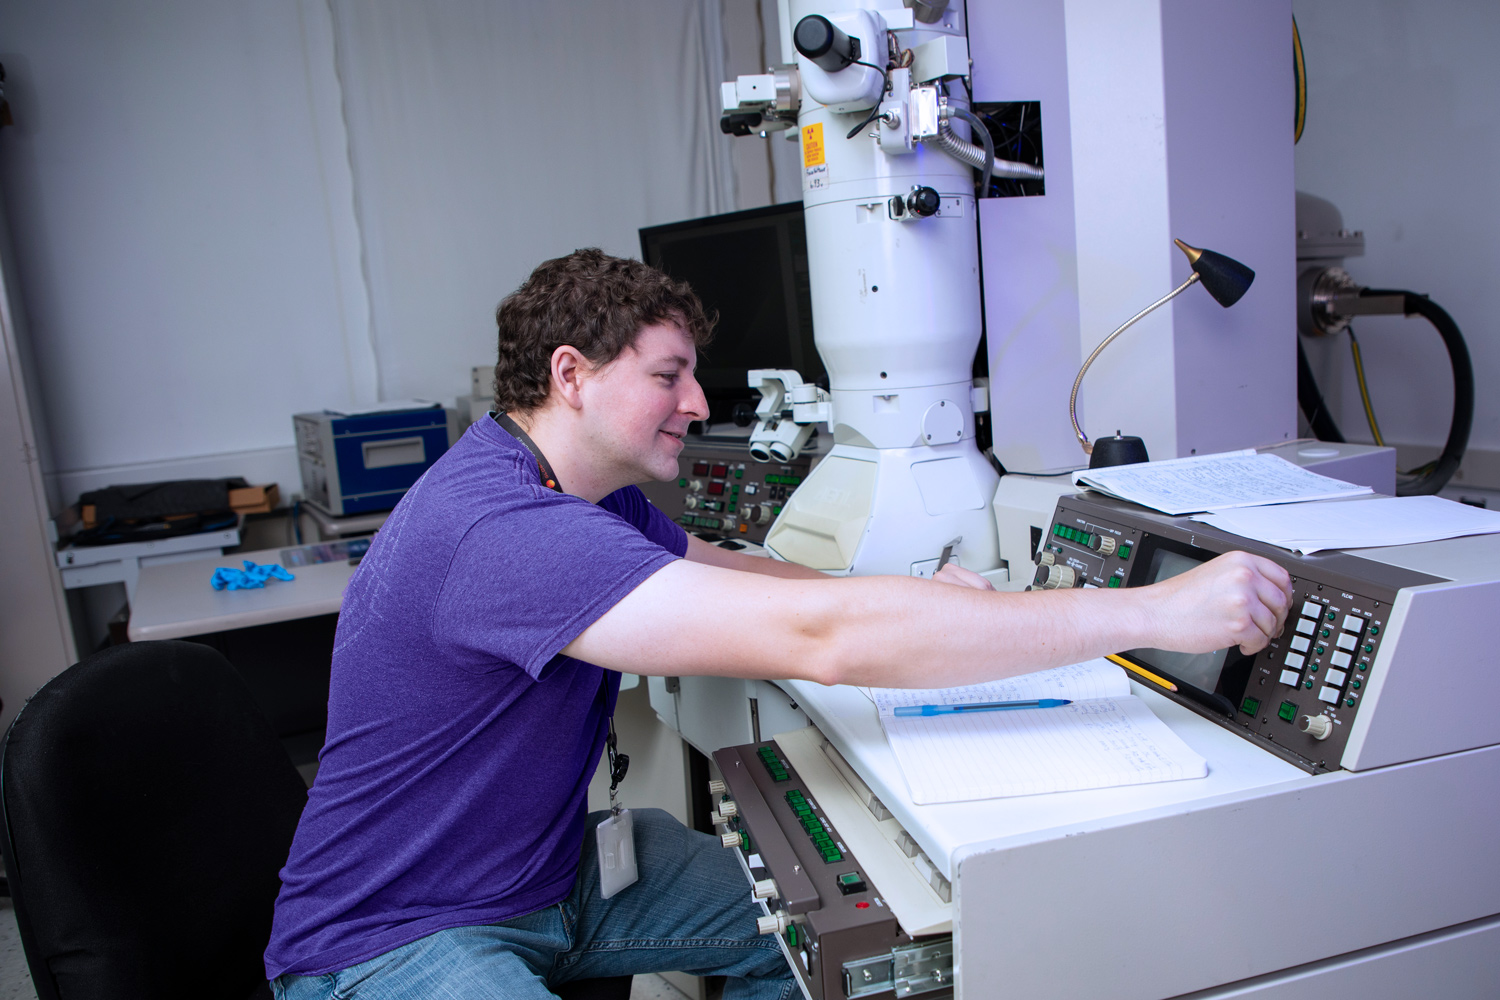 A student working with equipment in a UAlbany nanotechnology lab.